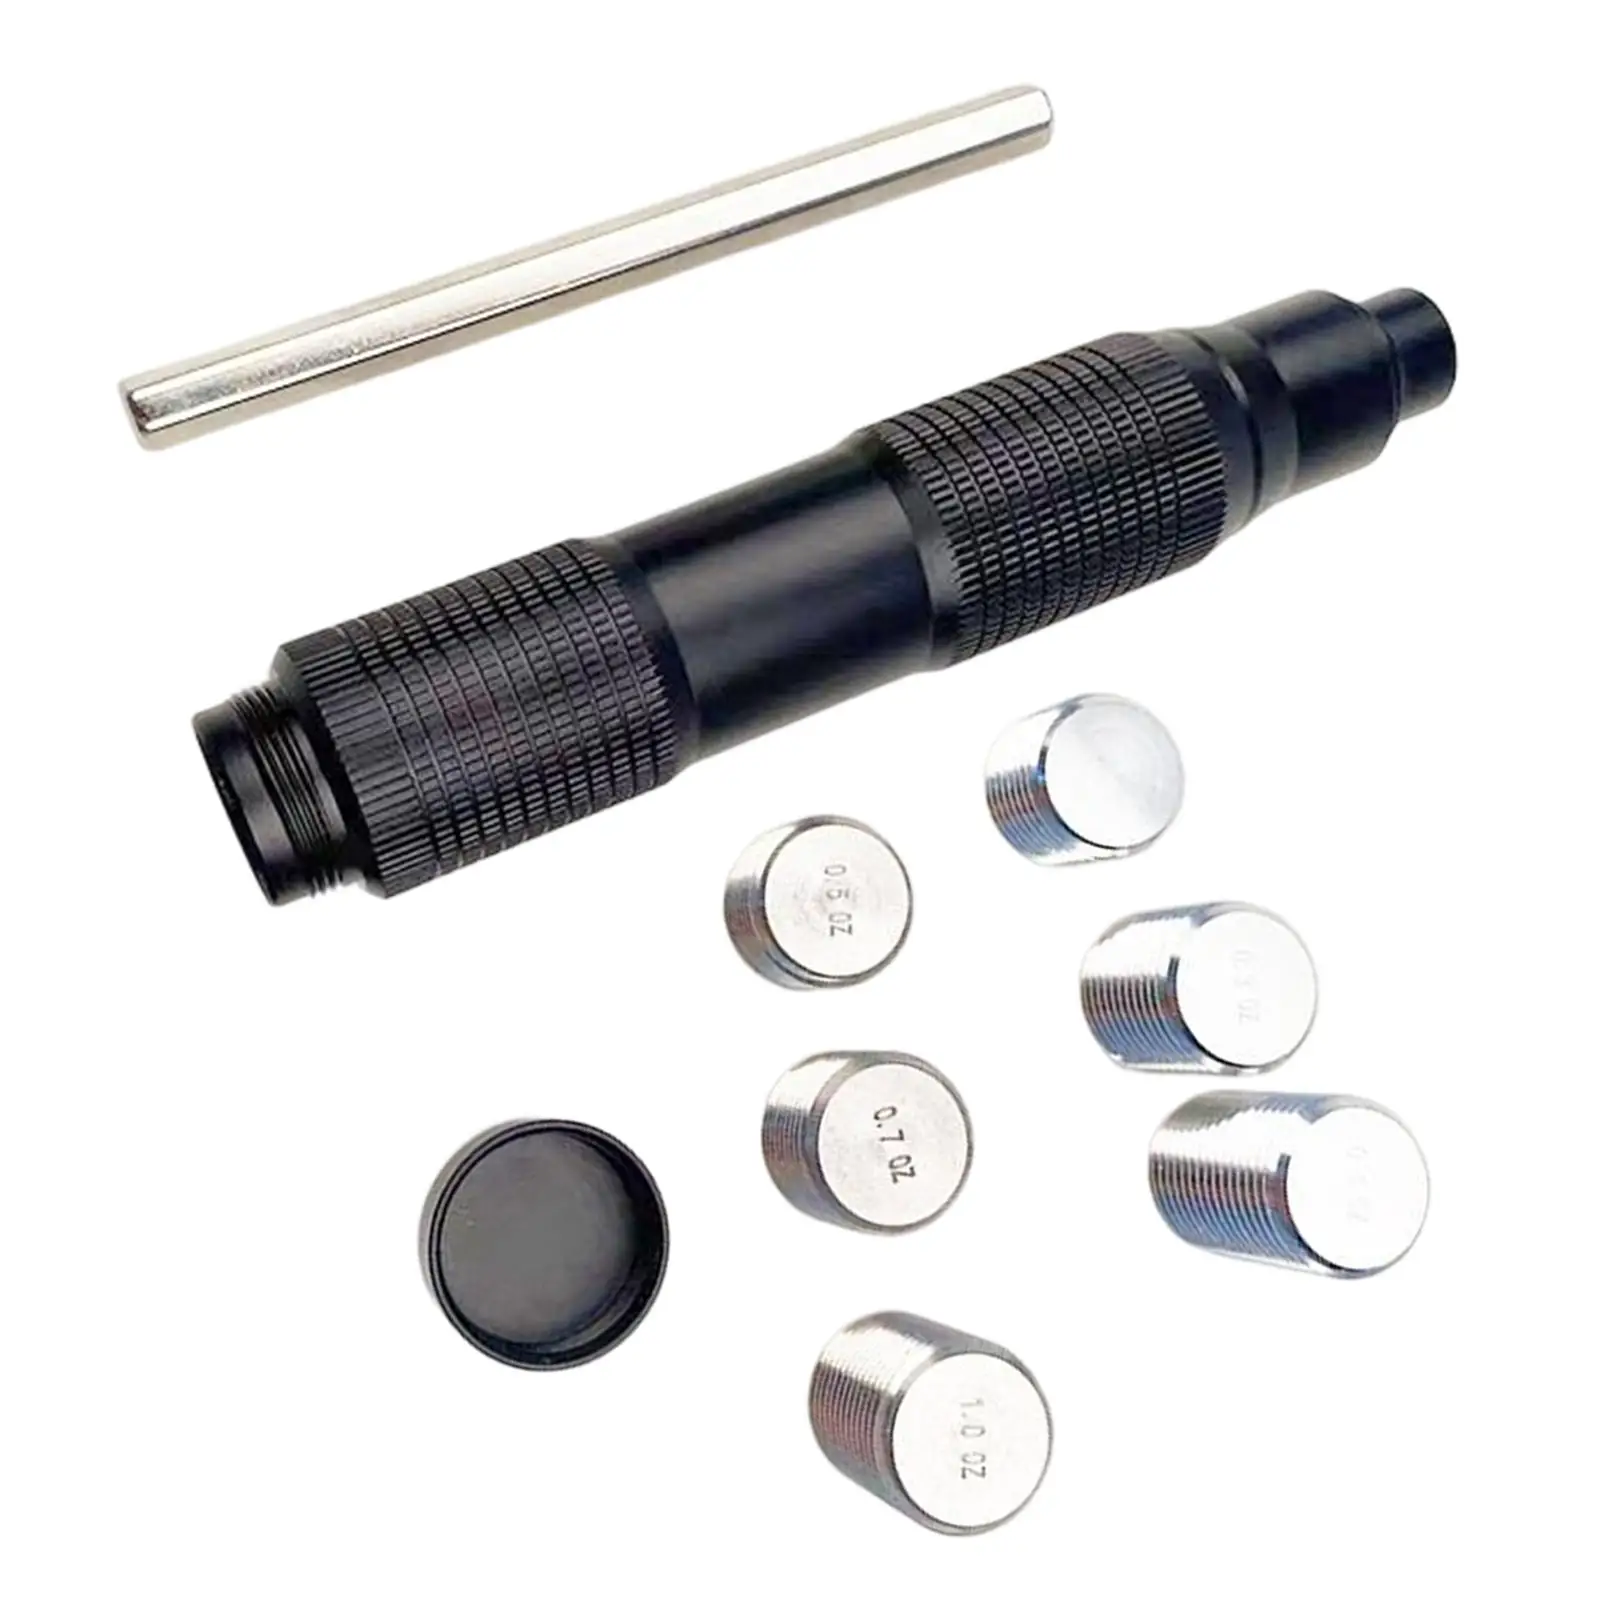 Billiards Cue Extension with Screws Cue End Lengthener Weighted Pool Cue